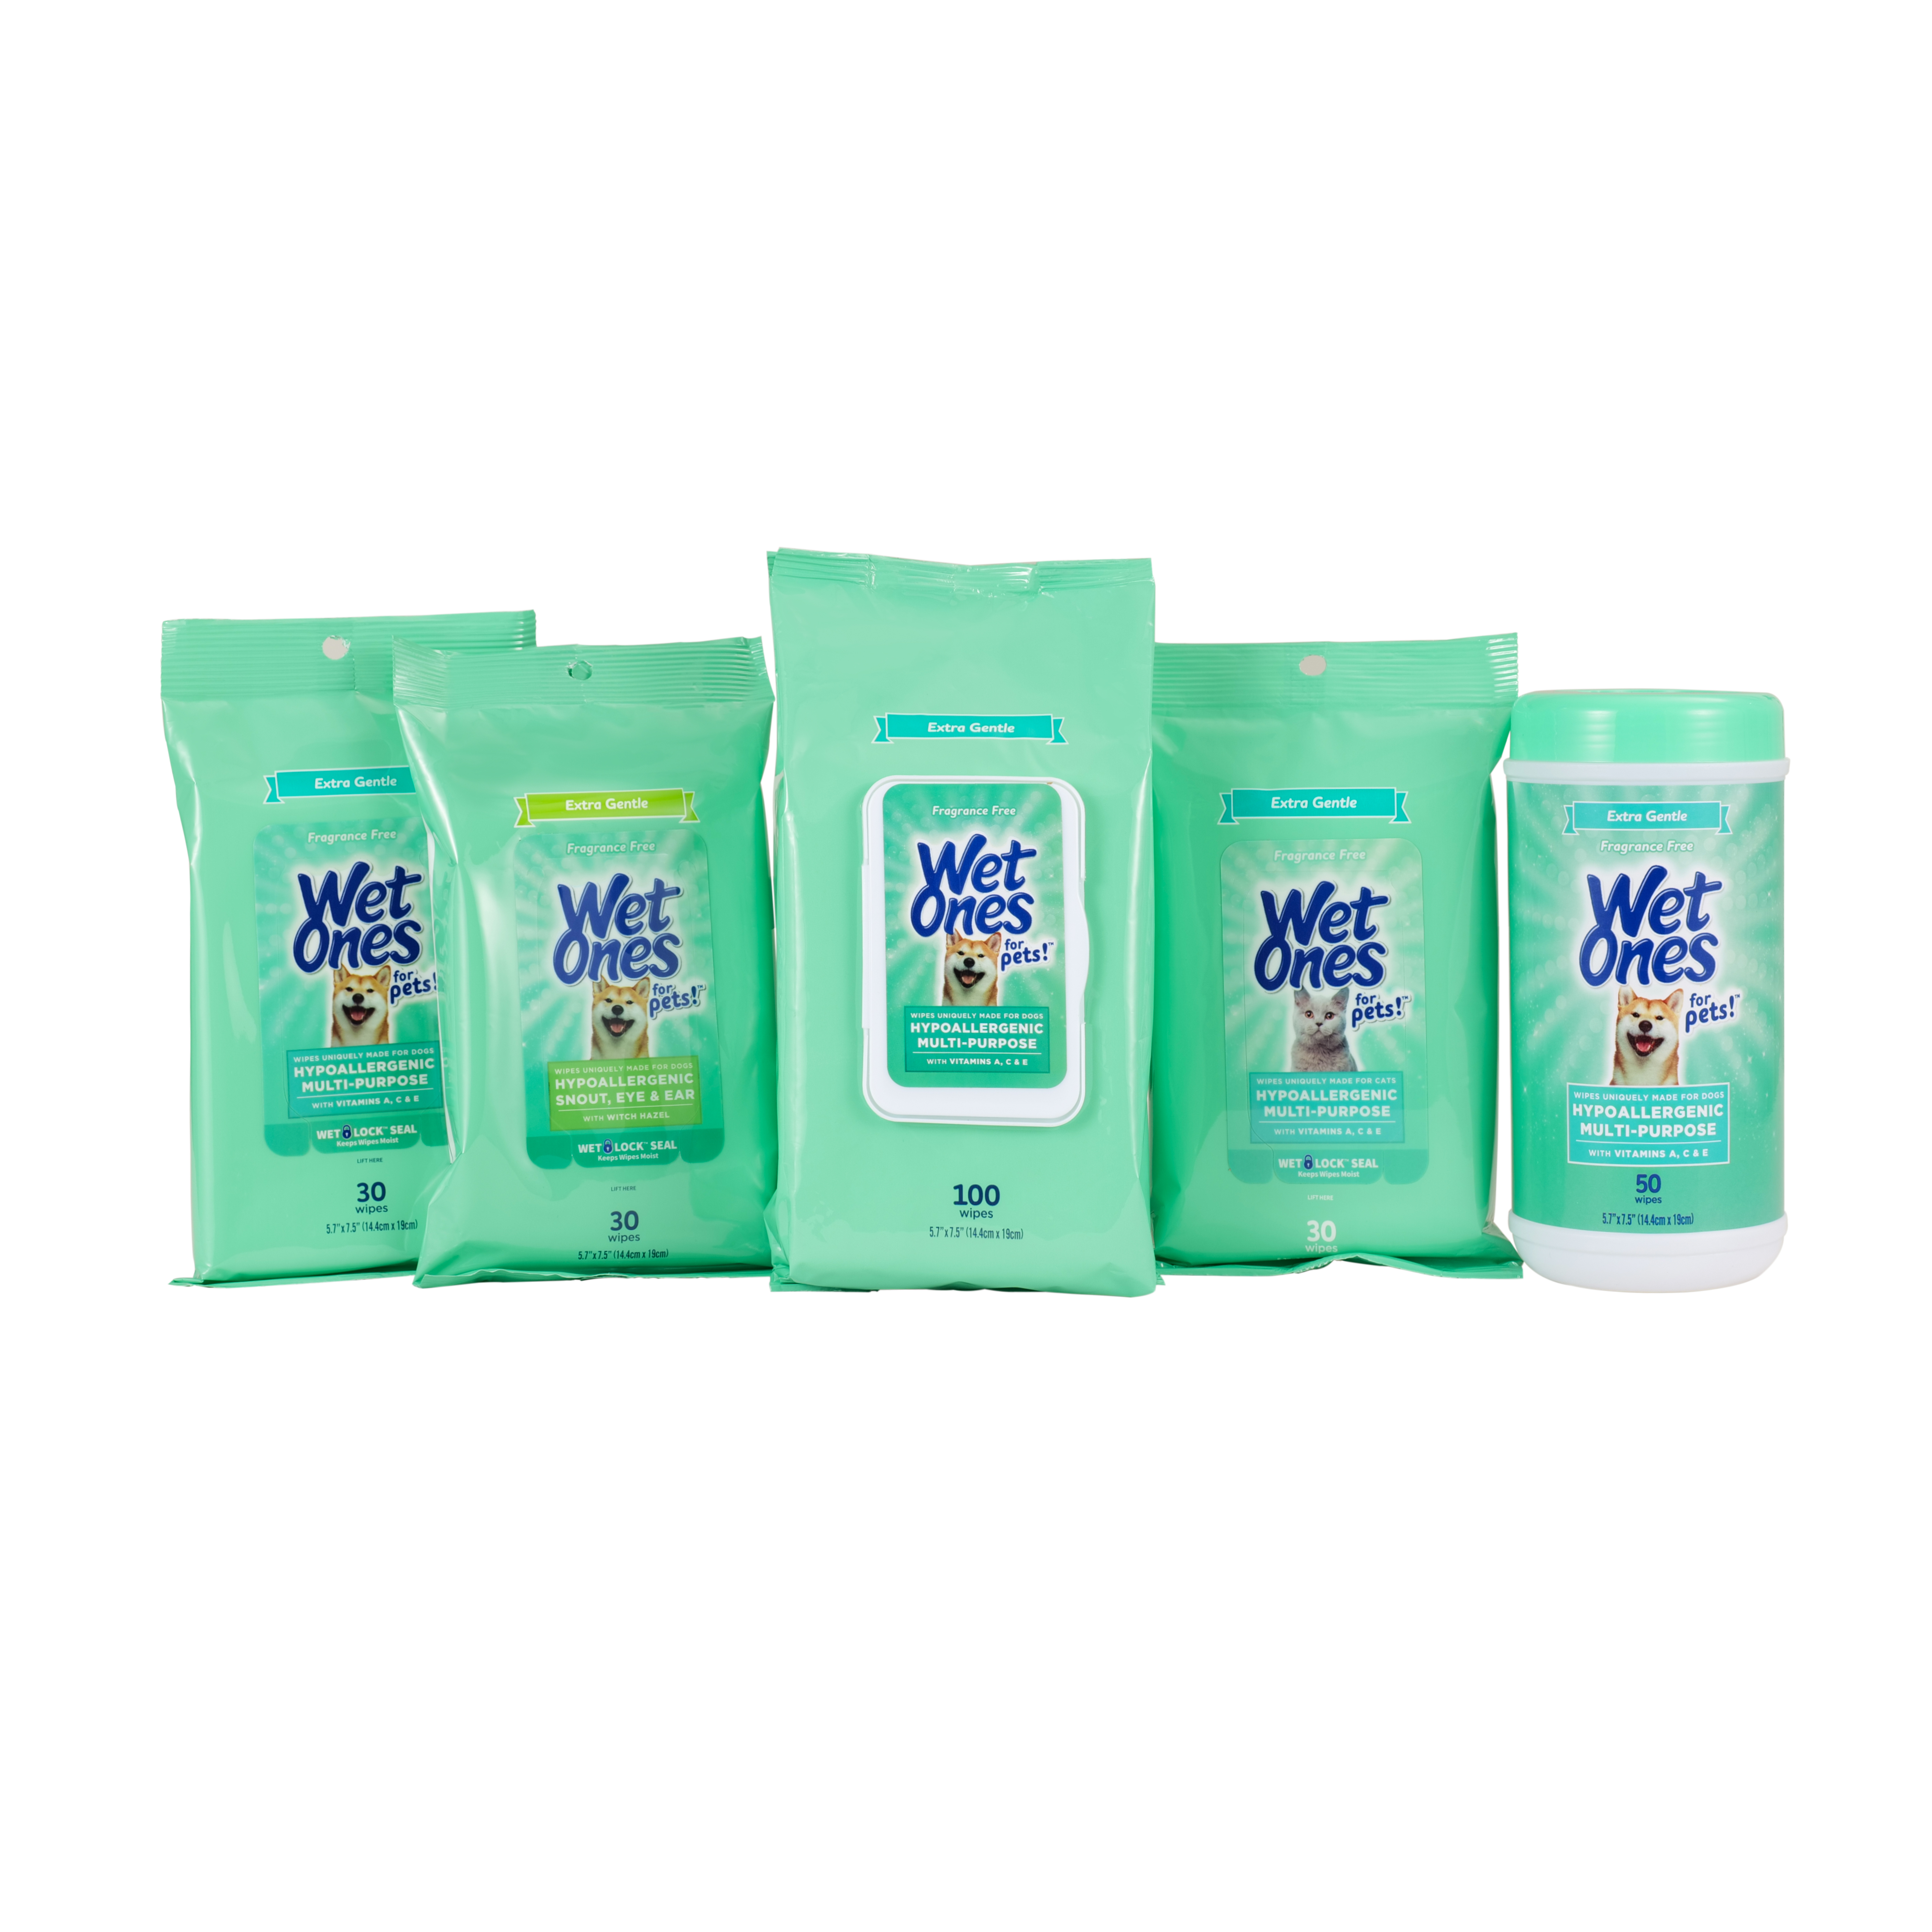 Gentle Multi-Surface Wipes